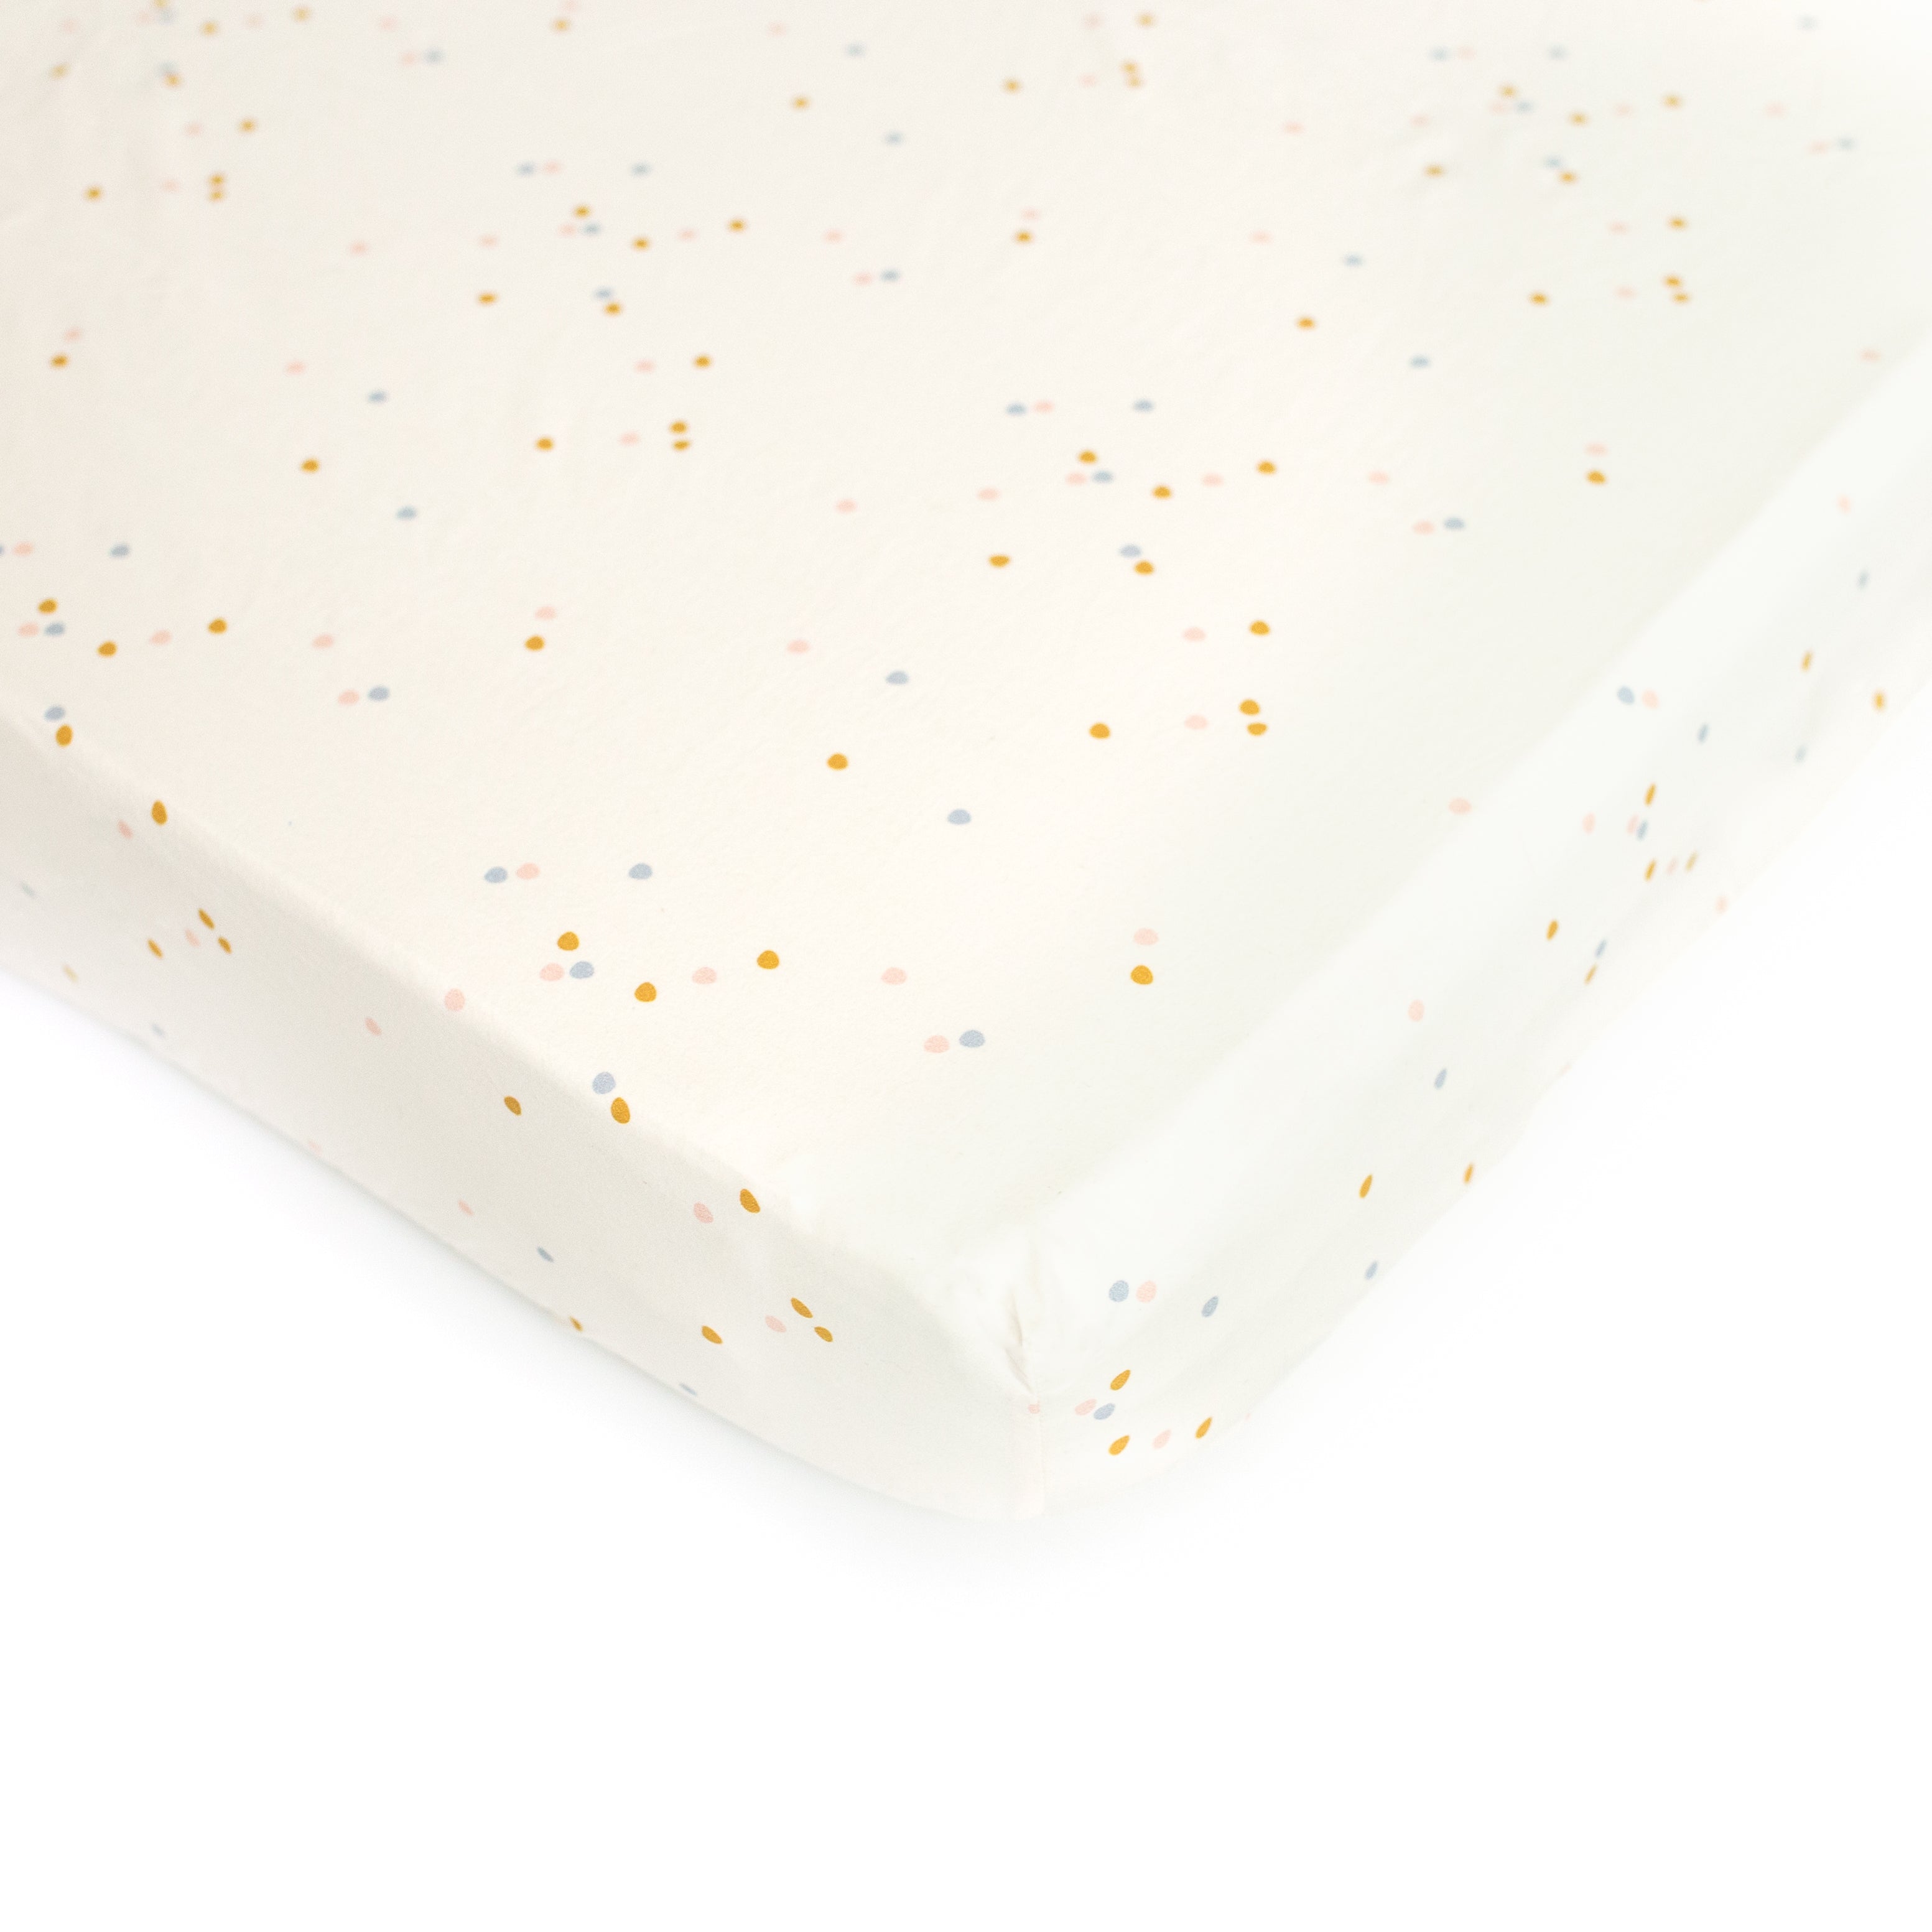 An Oolie organic cotton crib sheet with the cream confetti print, a natural color with small, irregular spots of color.